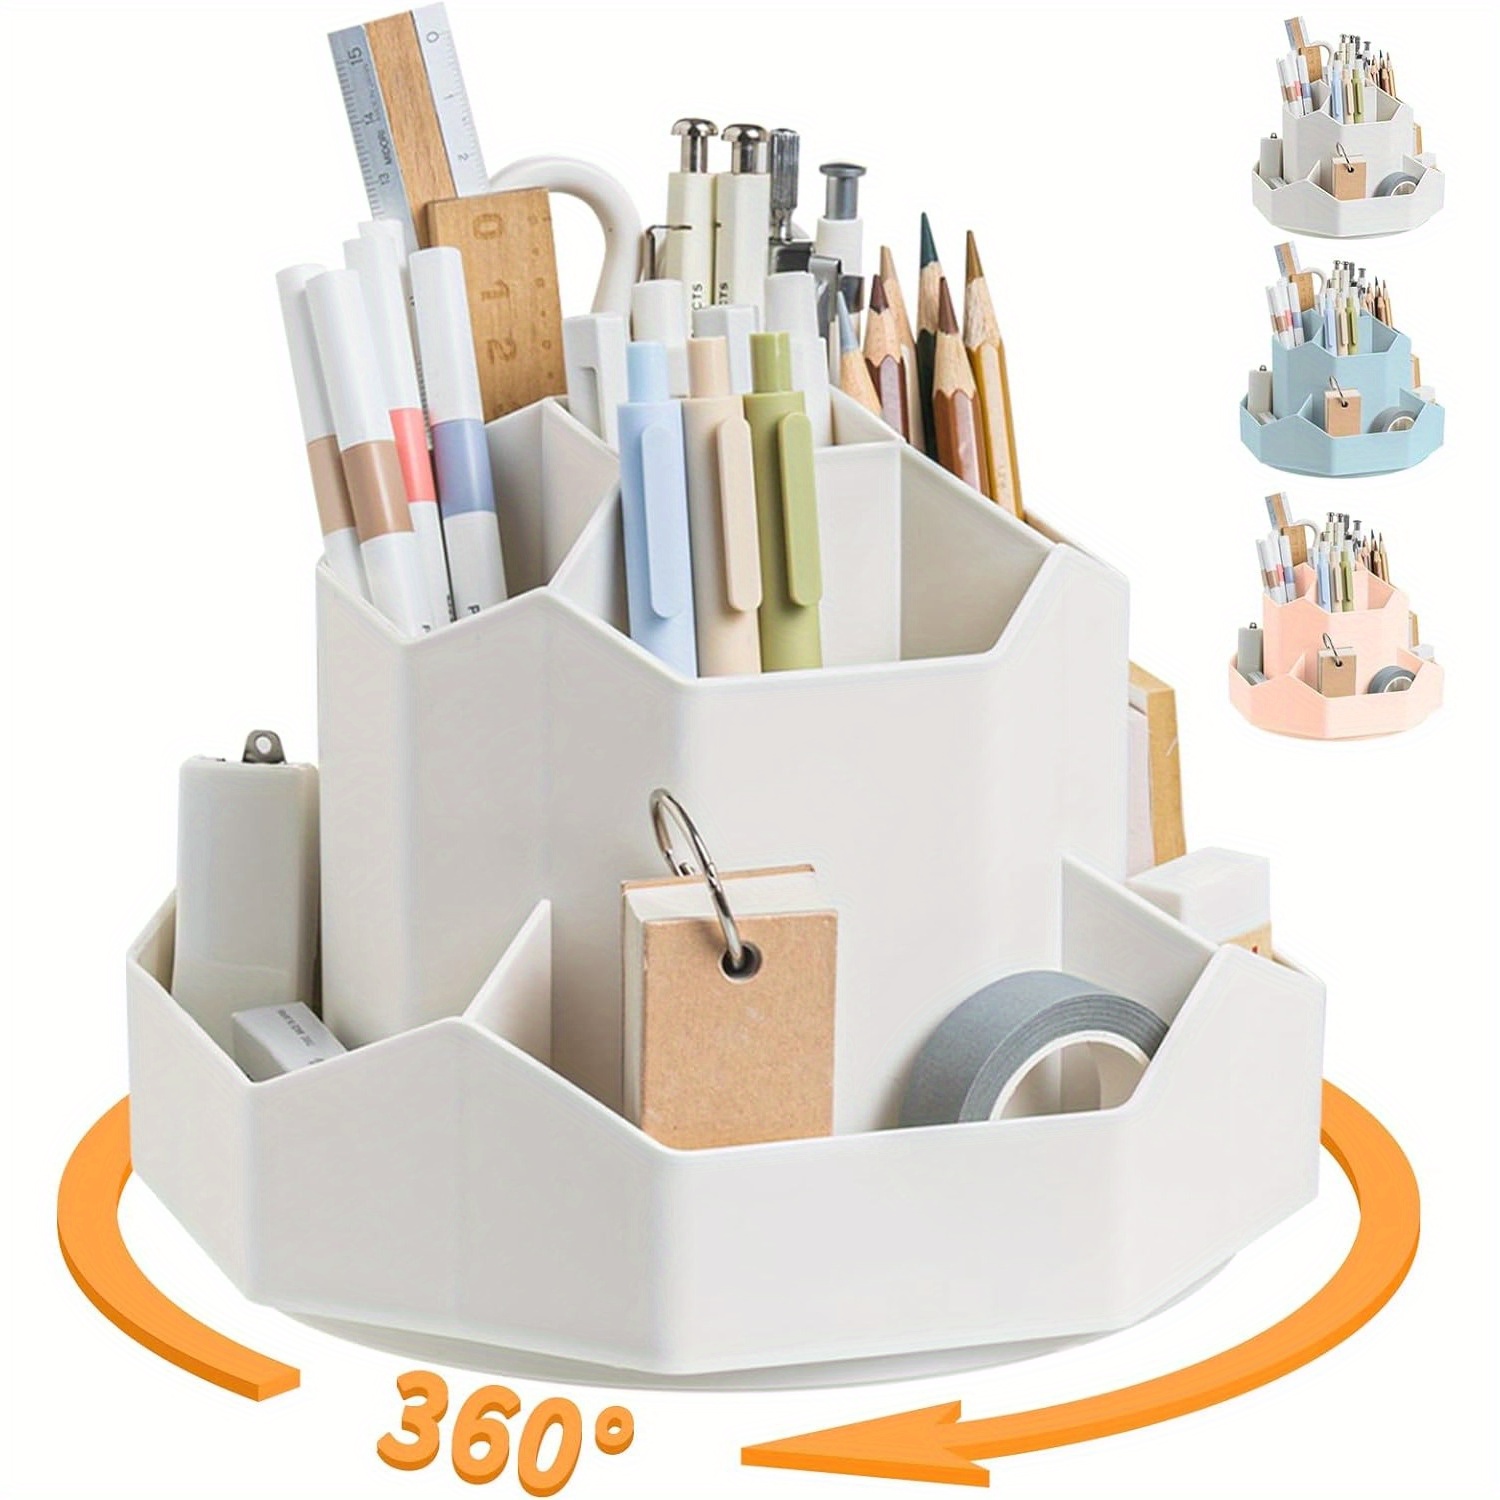 

clutter-free" 360-degree Rotating Desk Organizer - 9-slot Pencil Holder, Cute White Pen Cup For Office, School, Home Storage